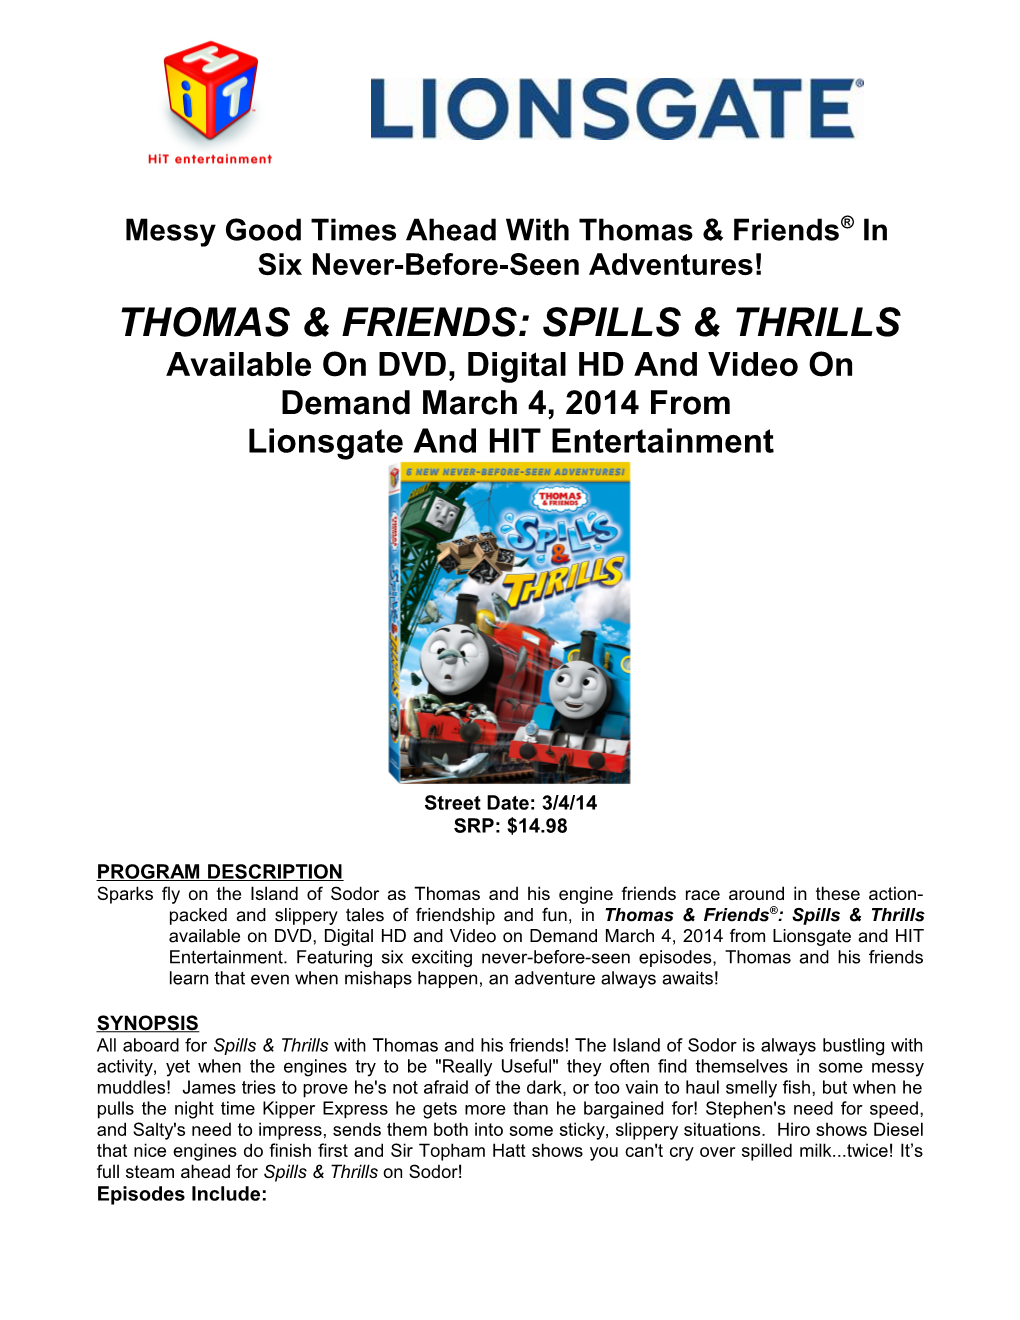 Messy Good Times Ahead with Thomas & Friends In